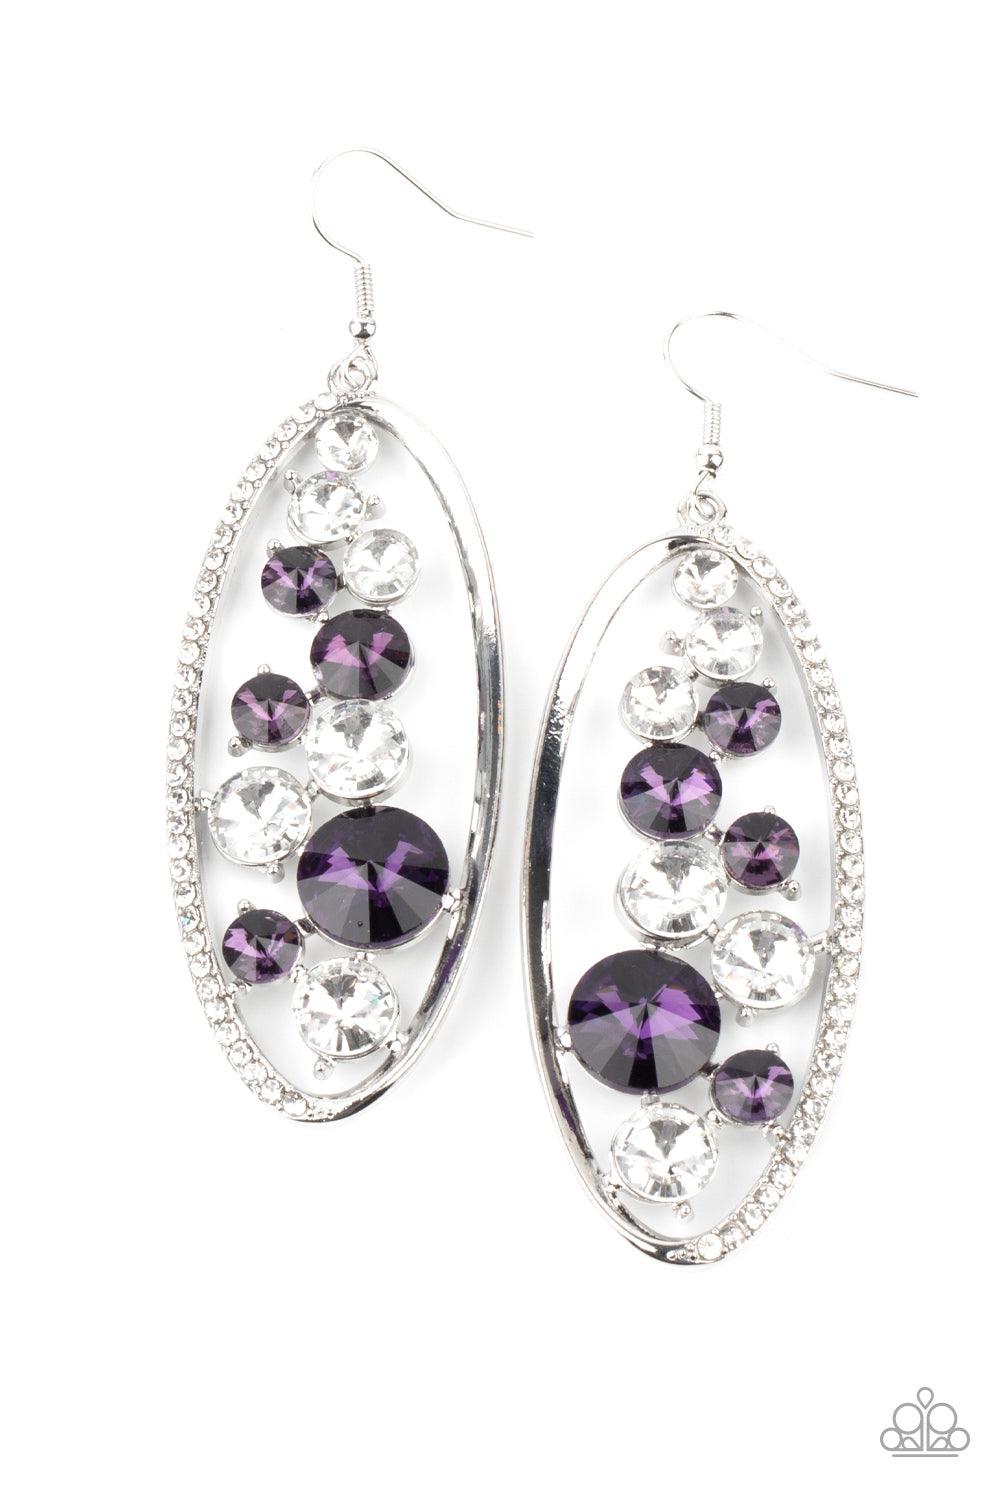 Paparazzi Accessories Rock Candy Bubbly - Purple An oversized collection of glassy white and glittery purple rhinestones sparkle inside a silver oval frame. One side of the frame is encrusted in dainty white rhinestones, adding a refined flair to the bubb